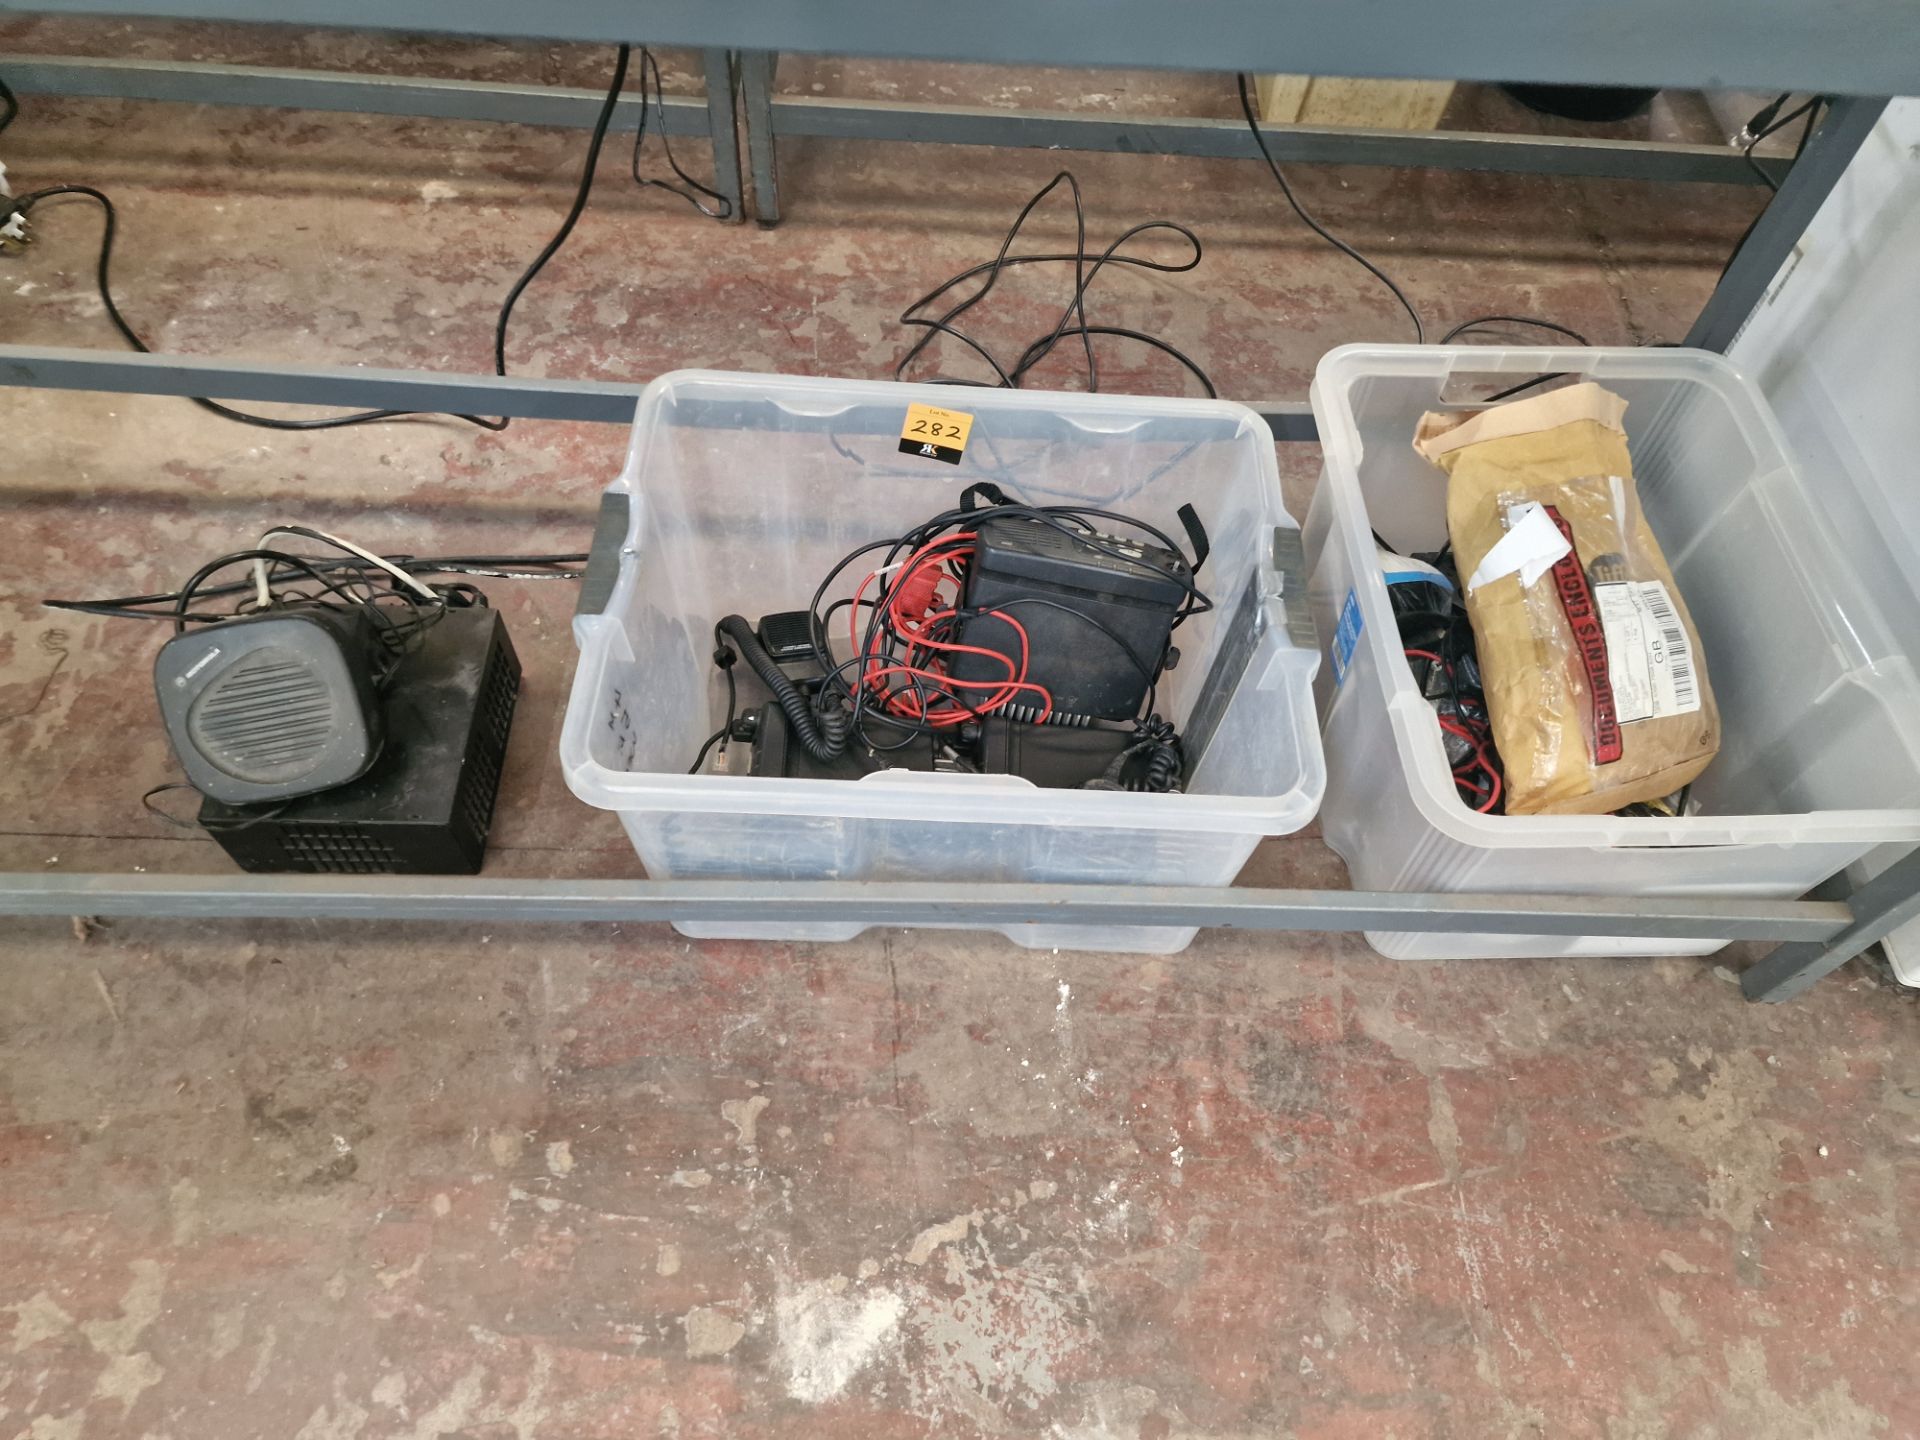 Quantity of in-car/taxi communications equipment, contents of 2 crates plus the miscellaneous items